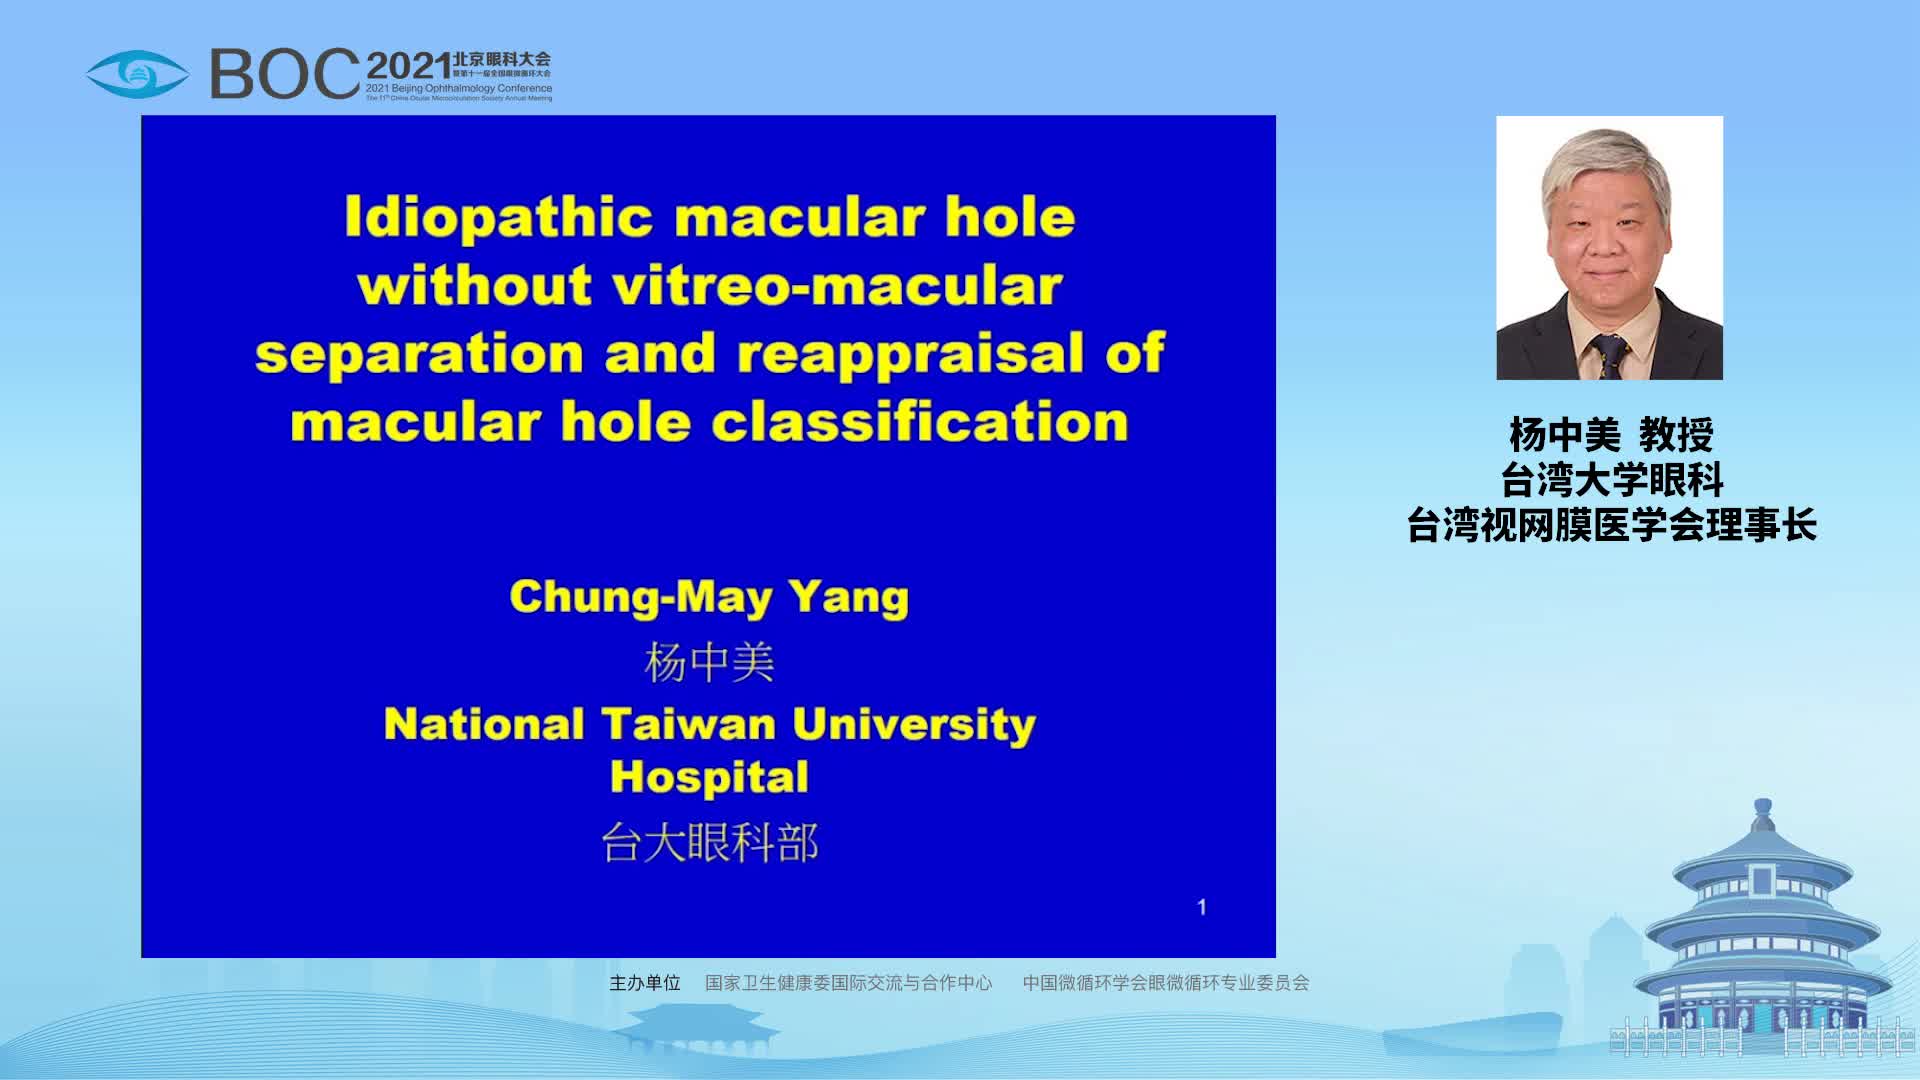  Idiopathic macular hole without vitreomacular separation and reappraisal of mac